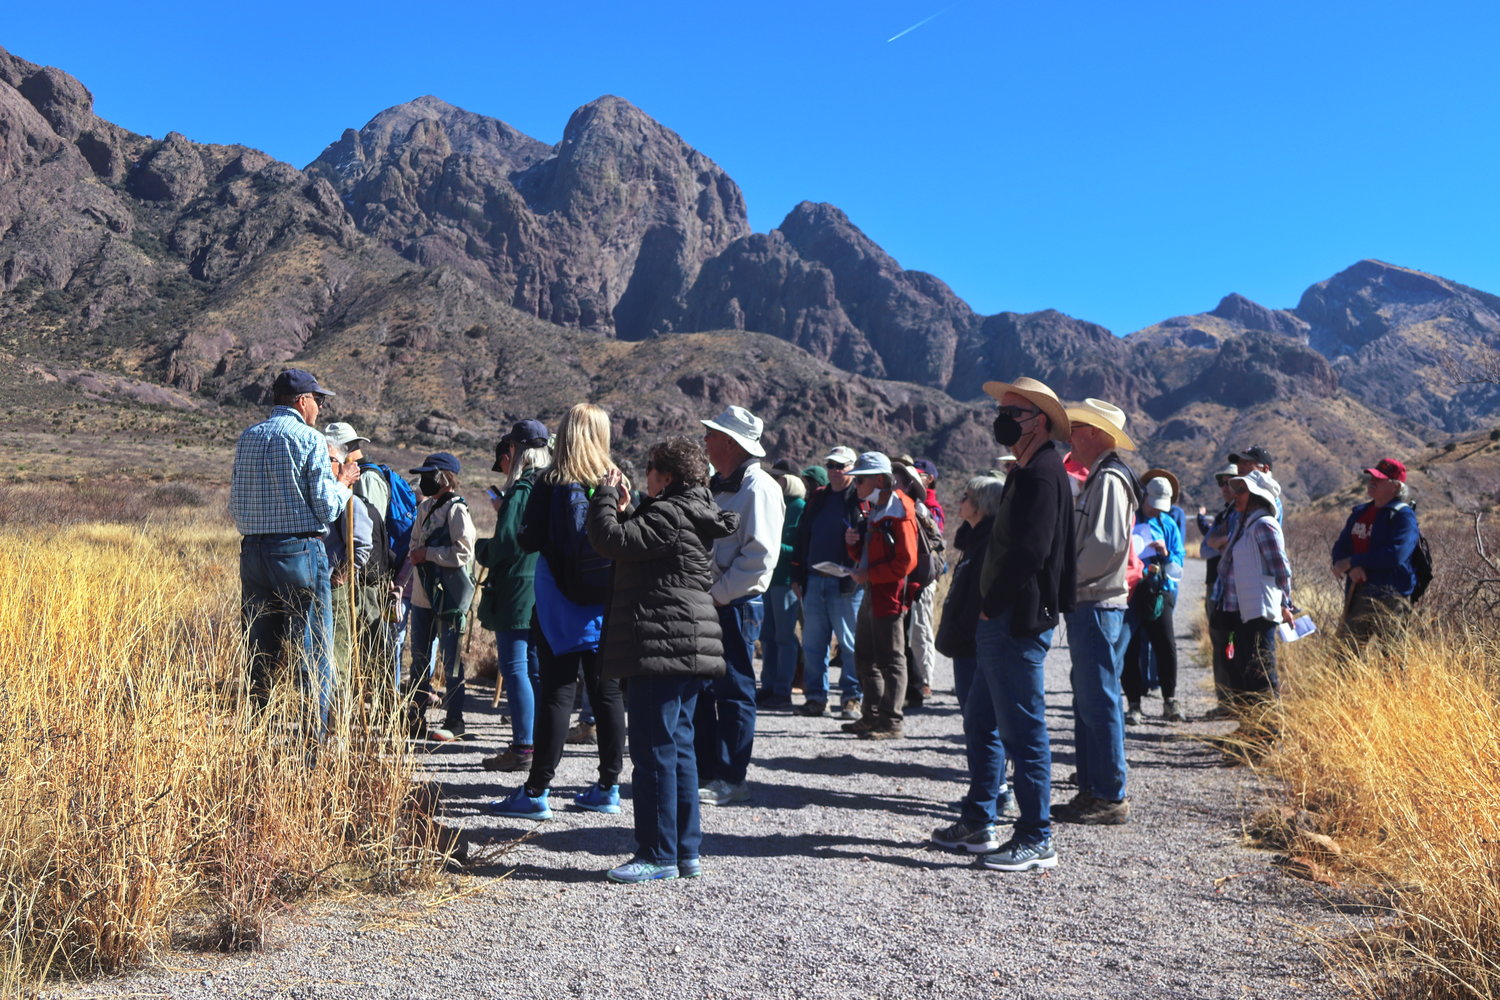 The Las Cruces chapter of The Native Plante Society of New Mexico collects hikers for a nature hike at Dripping Springs. The leader, John Freyermuth, is on the far left.